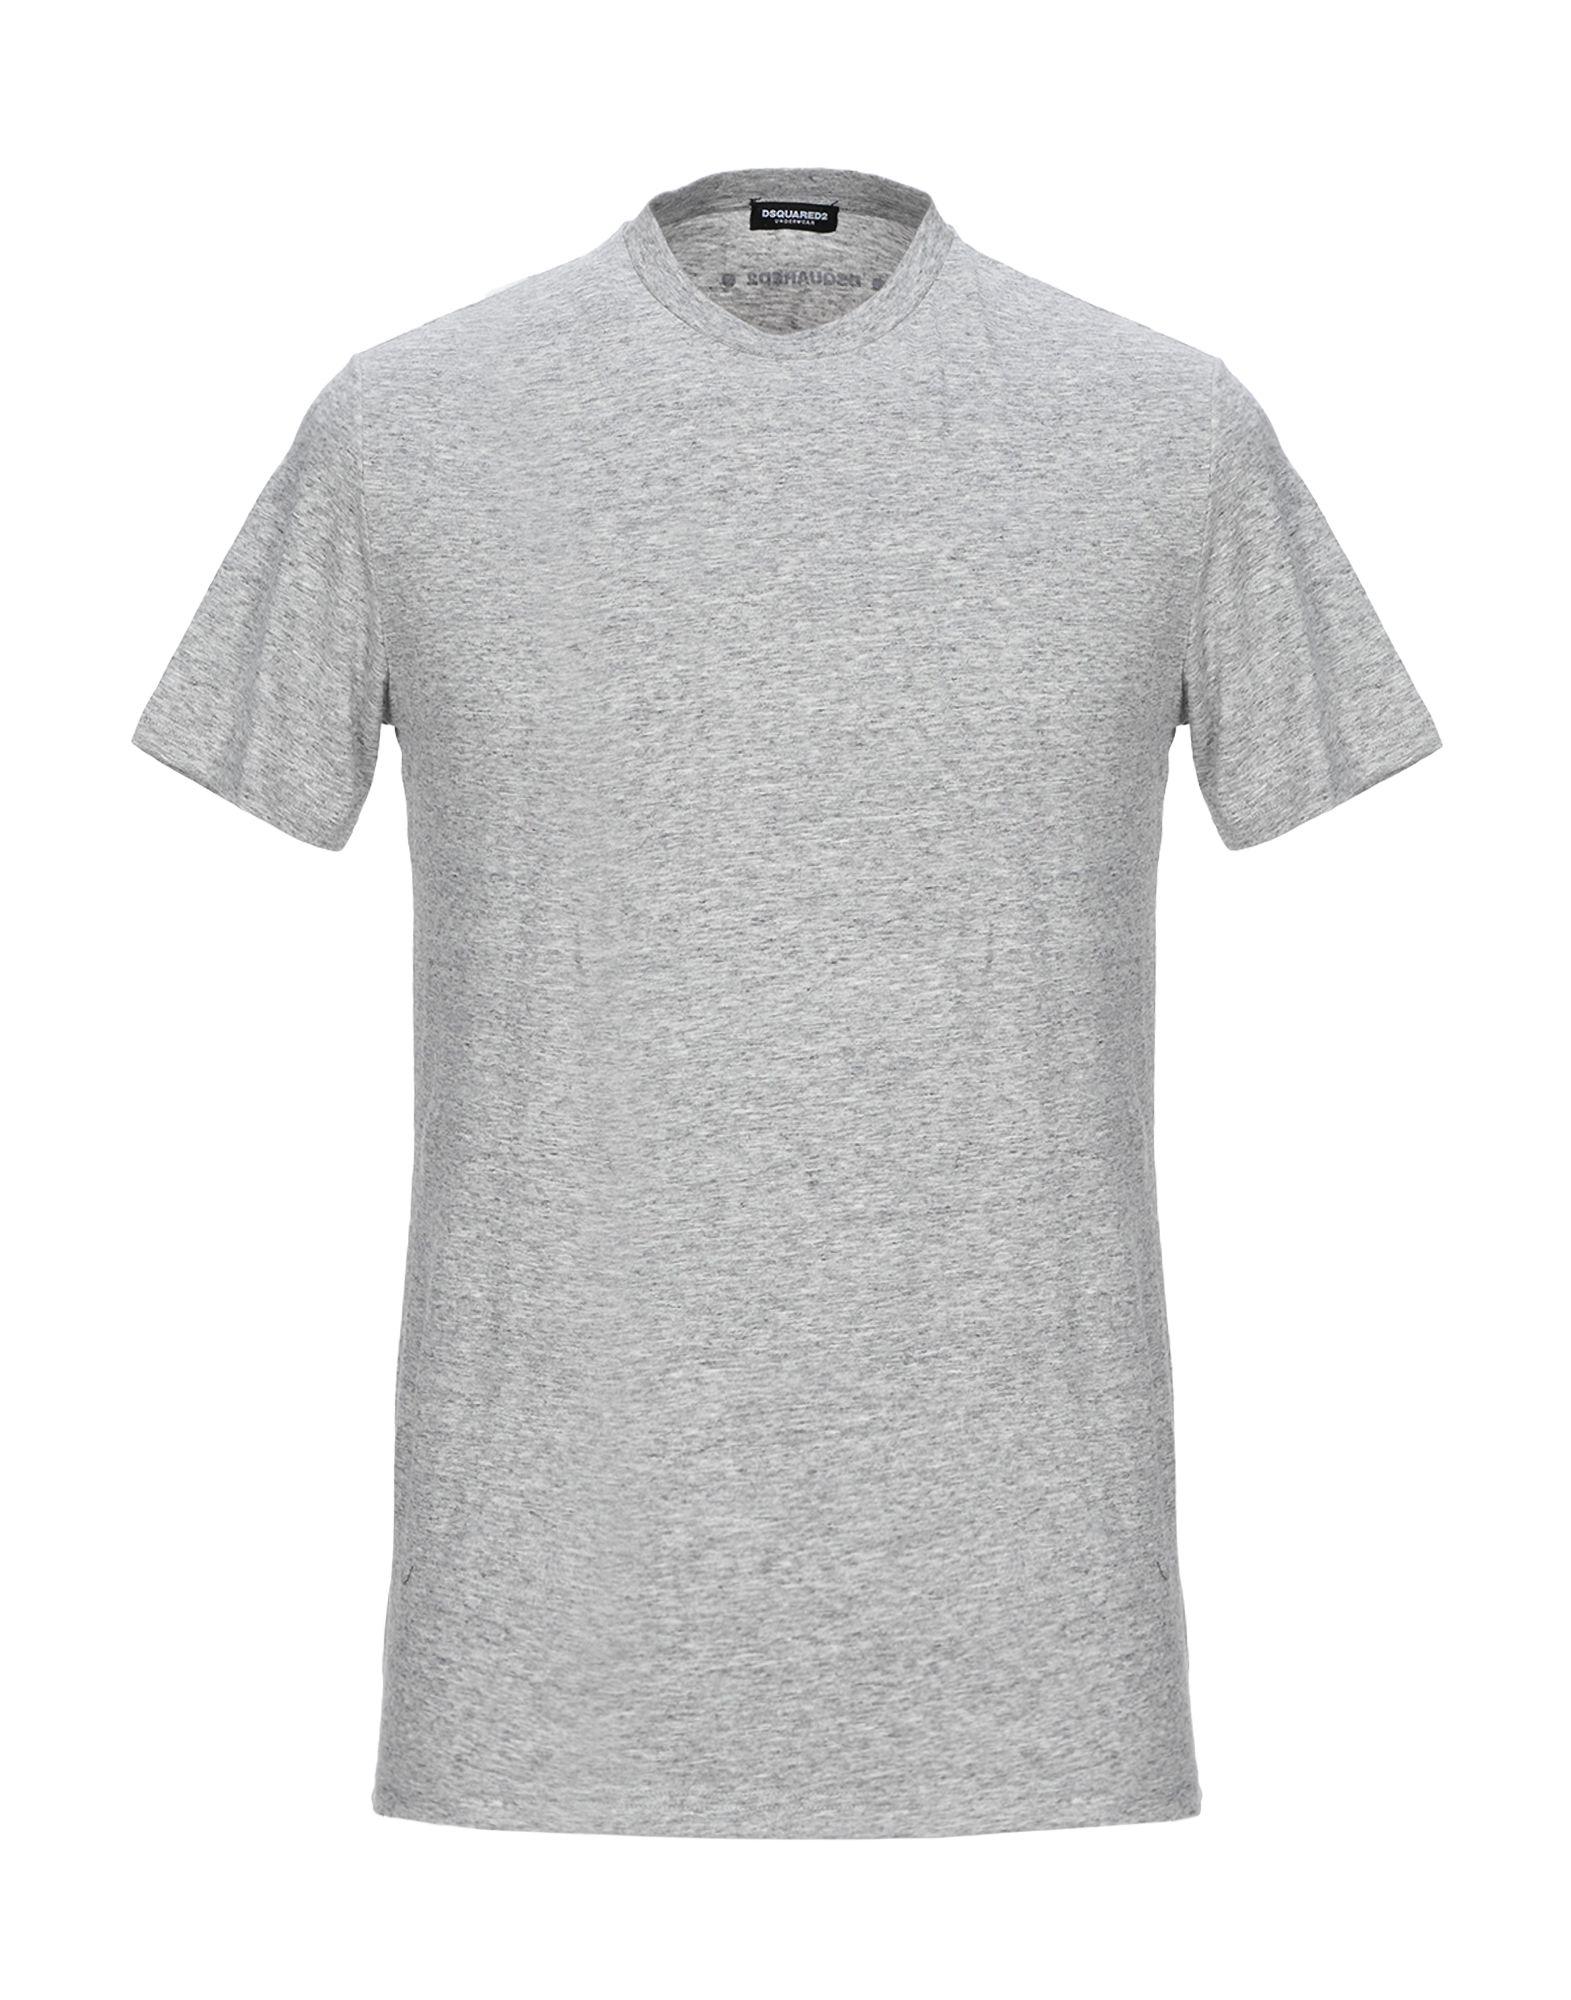 DSquared² Cotton Undershirt in Light Grey (Gray) for Men - Save 13% - Lyst